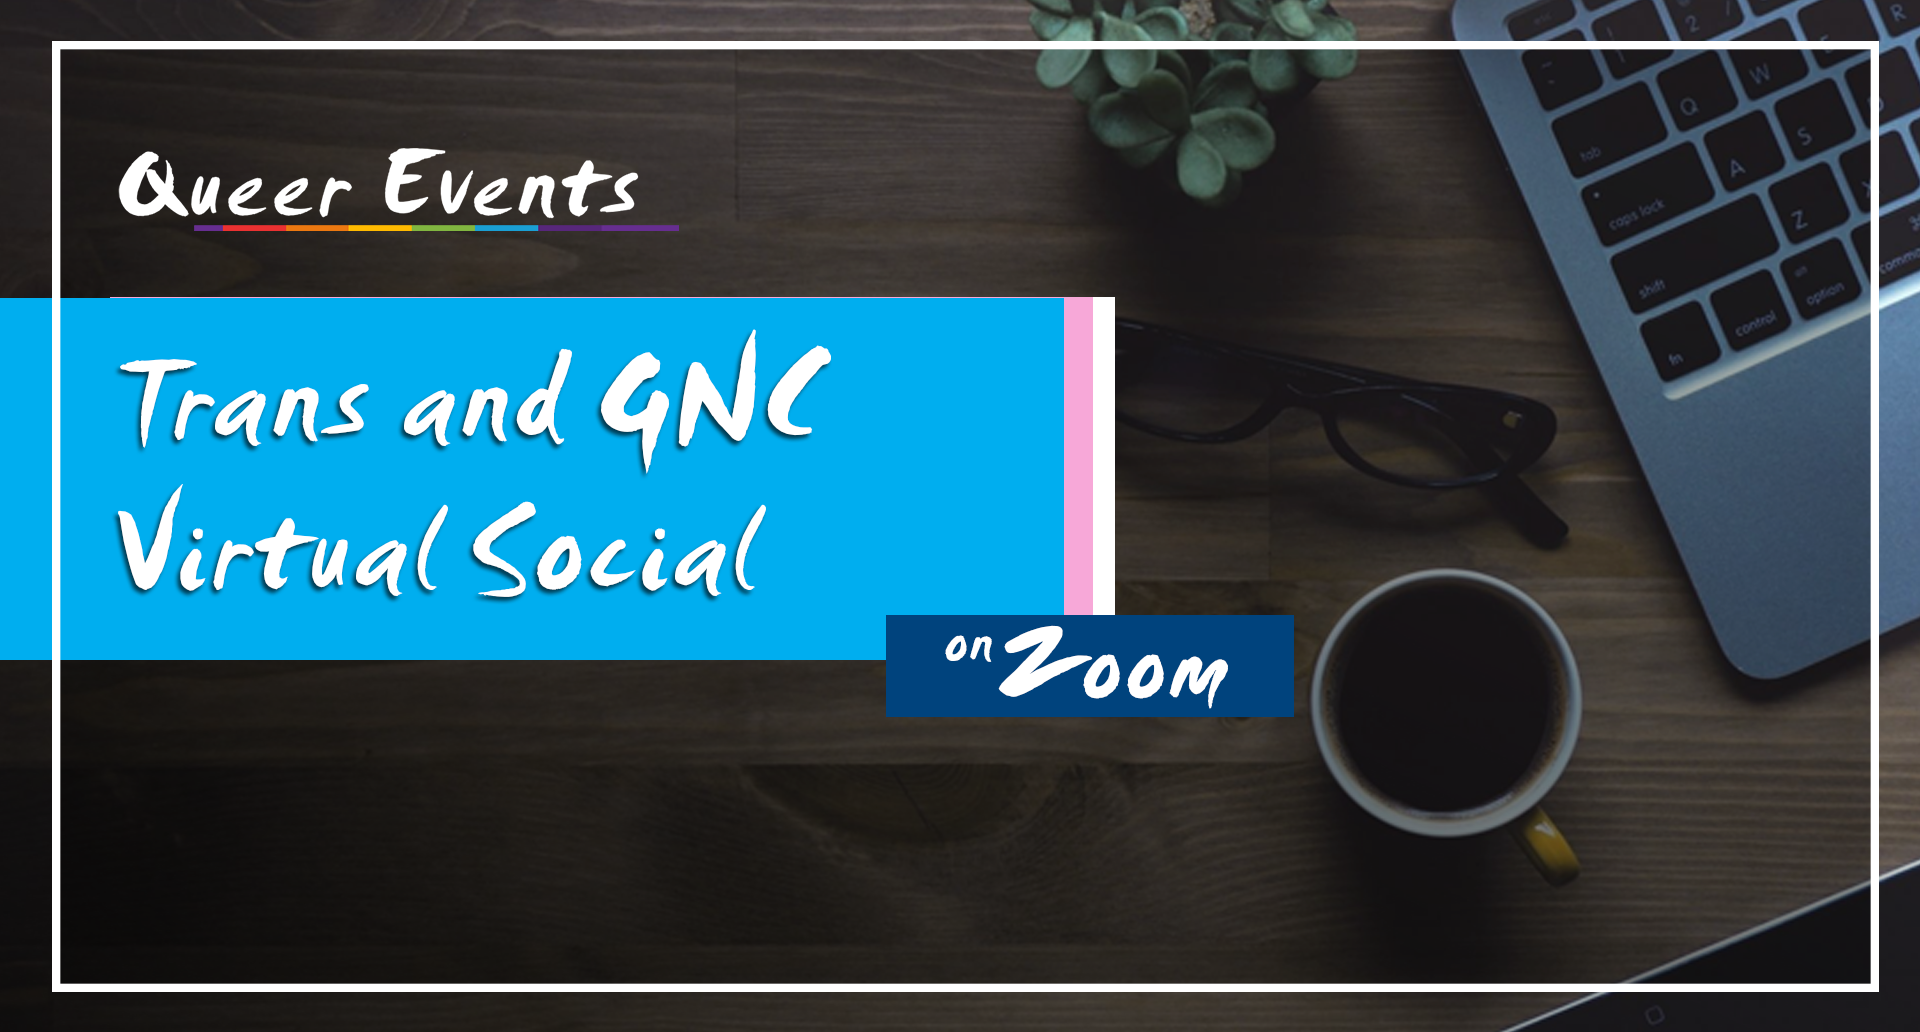 QueerEvents.ca - queer online event - trans and gender nonconforming social event